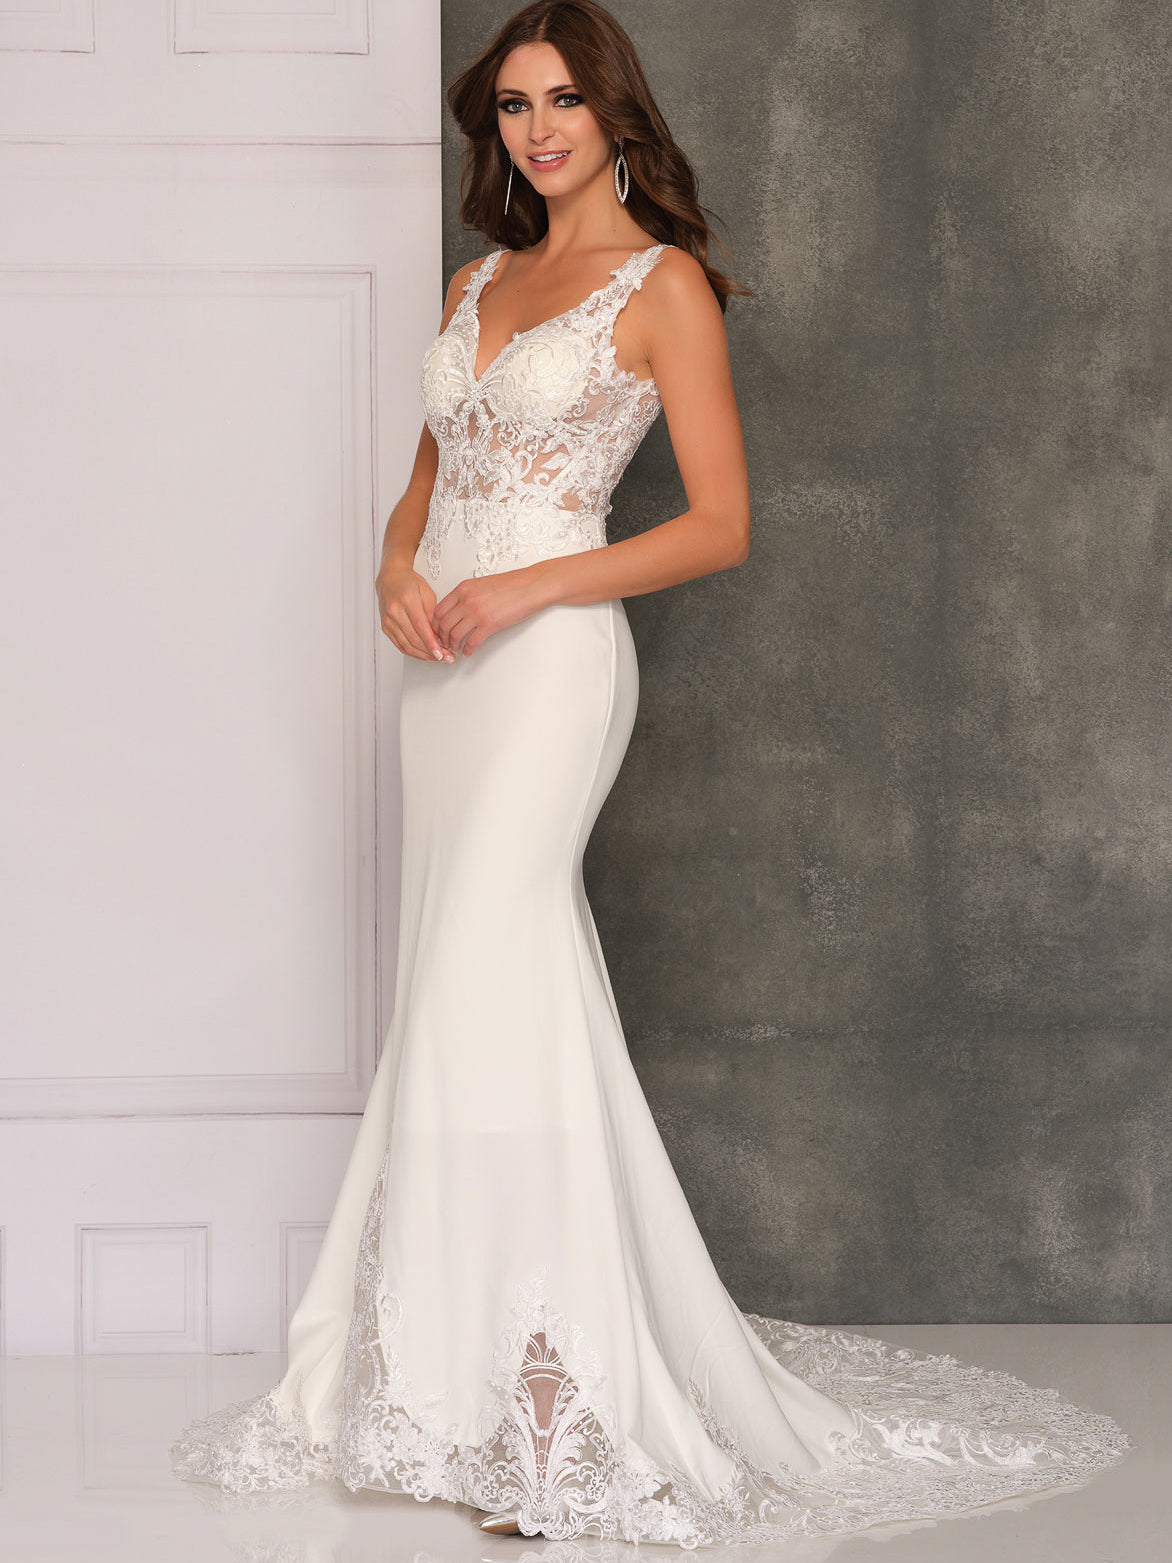 Crepe V-Neck Mermaid Gown With Illusion Lace Cutout Skirt